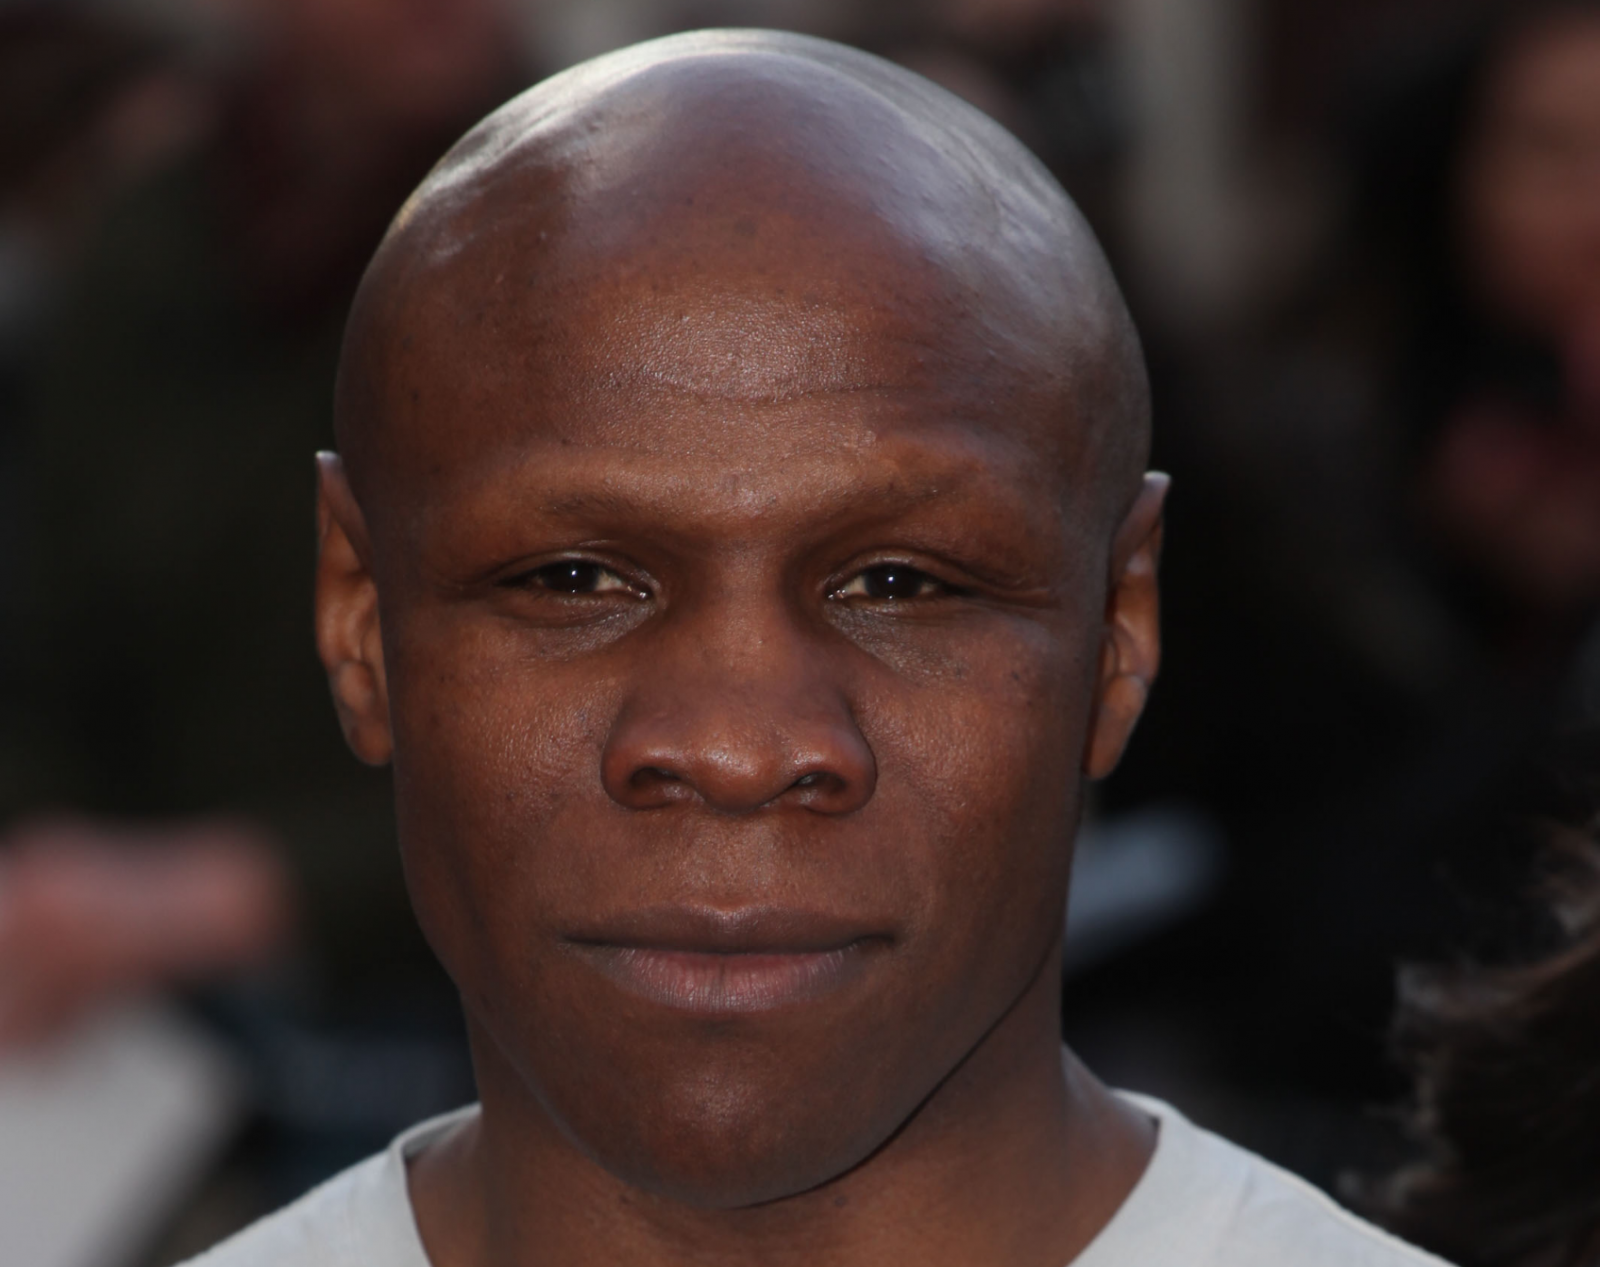 There’s something you’ve never noticed about Chris Eubank before